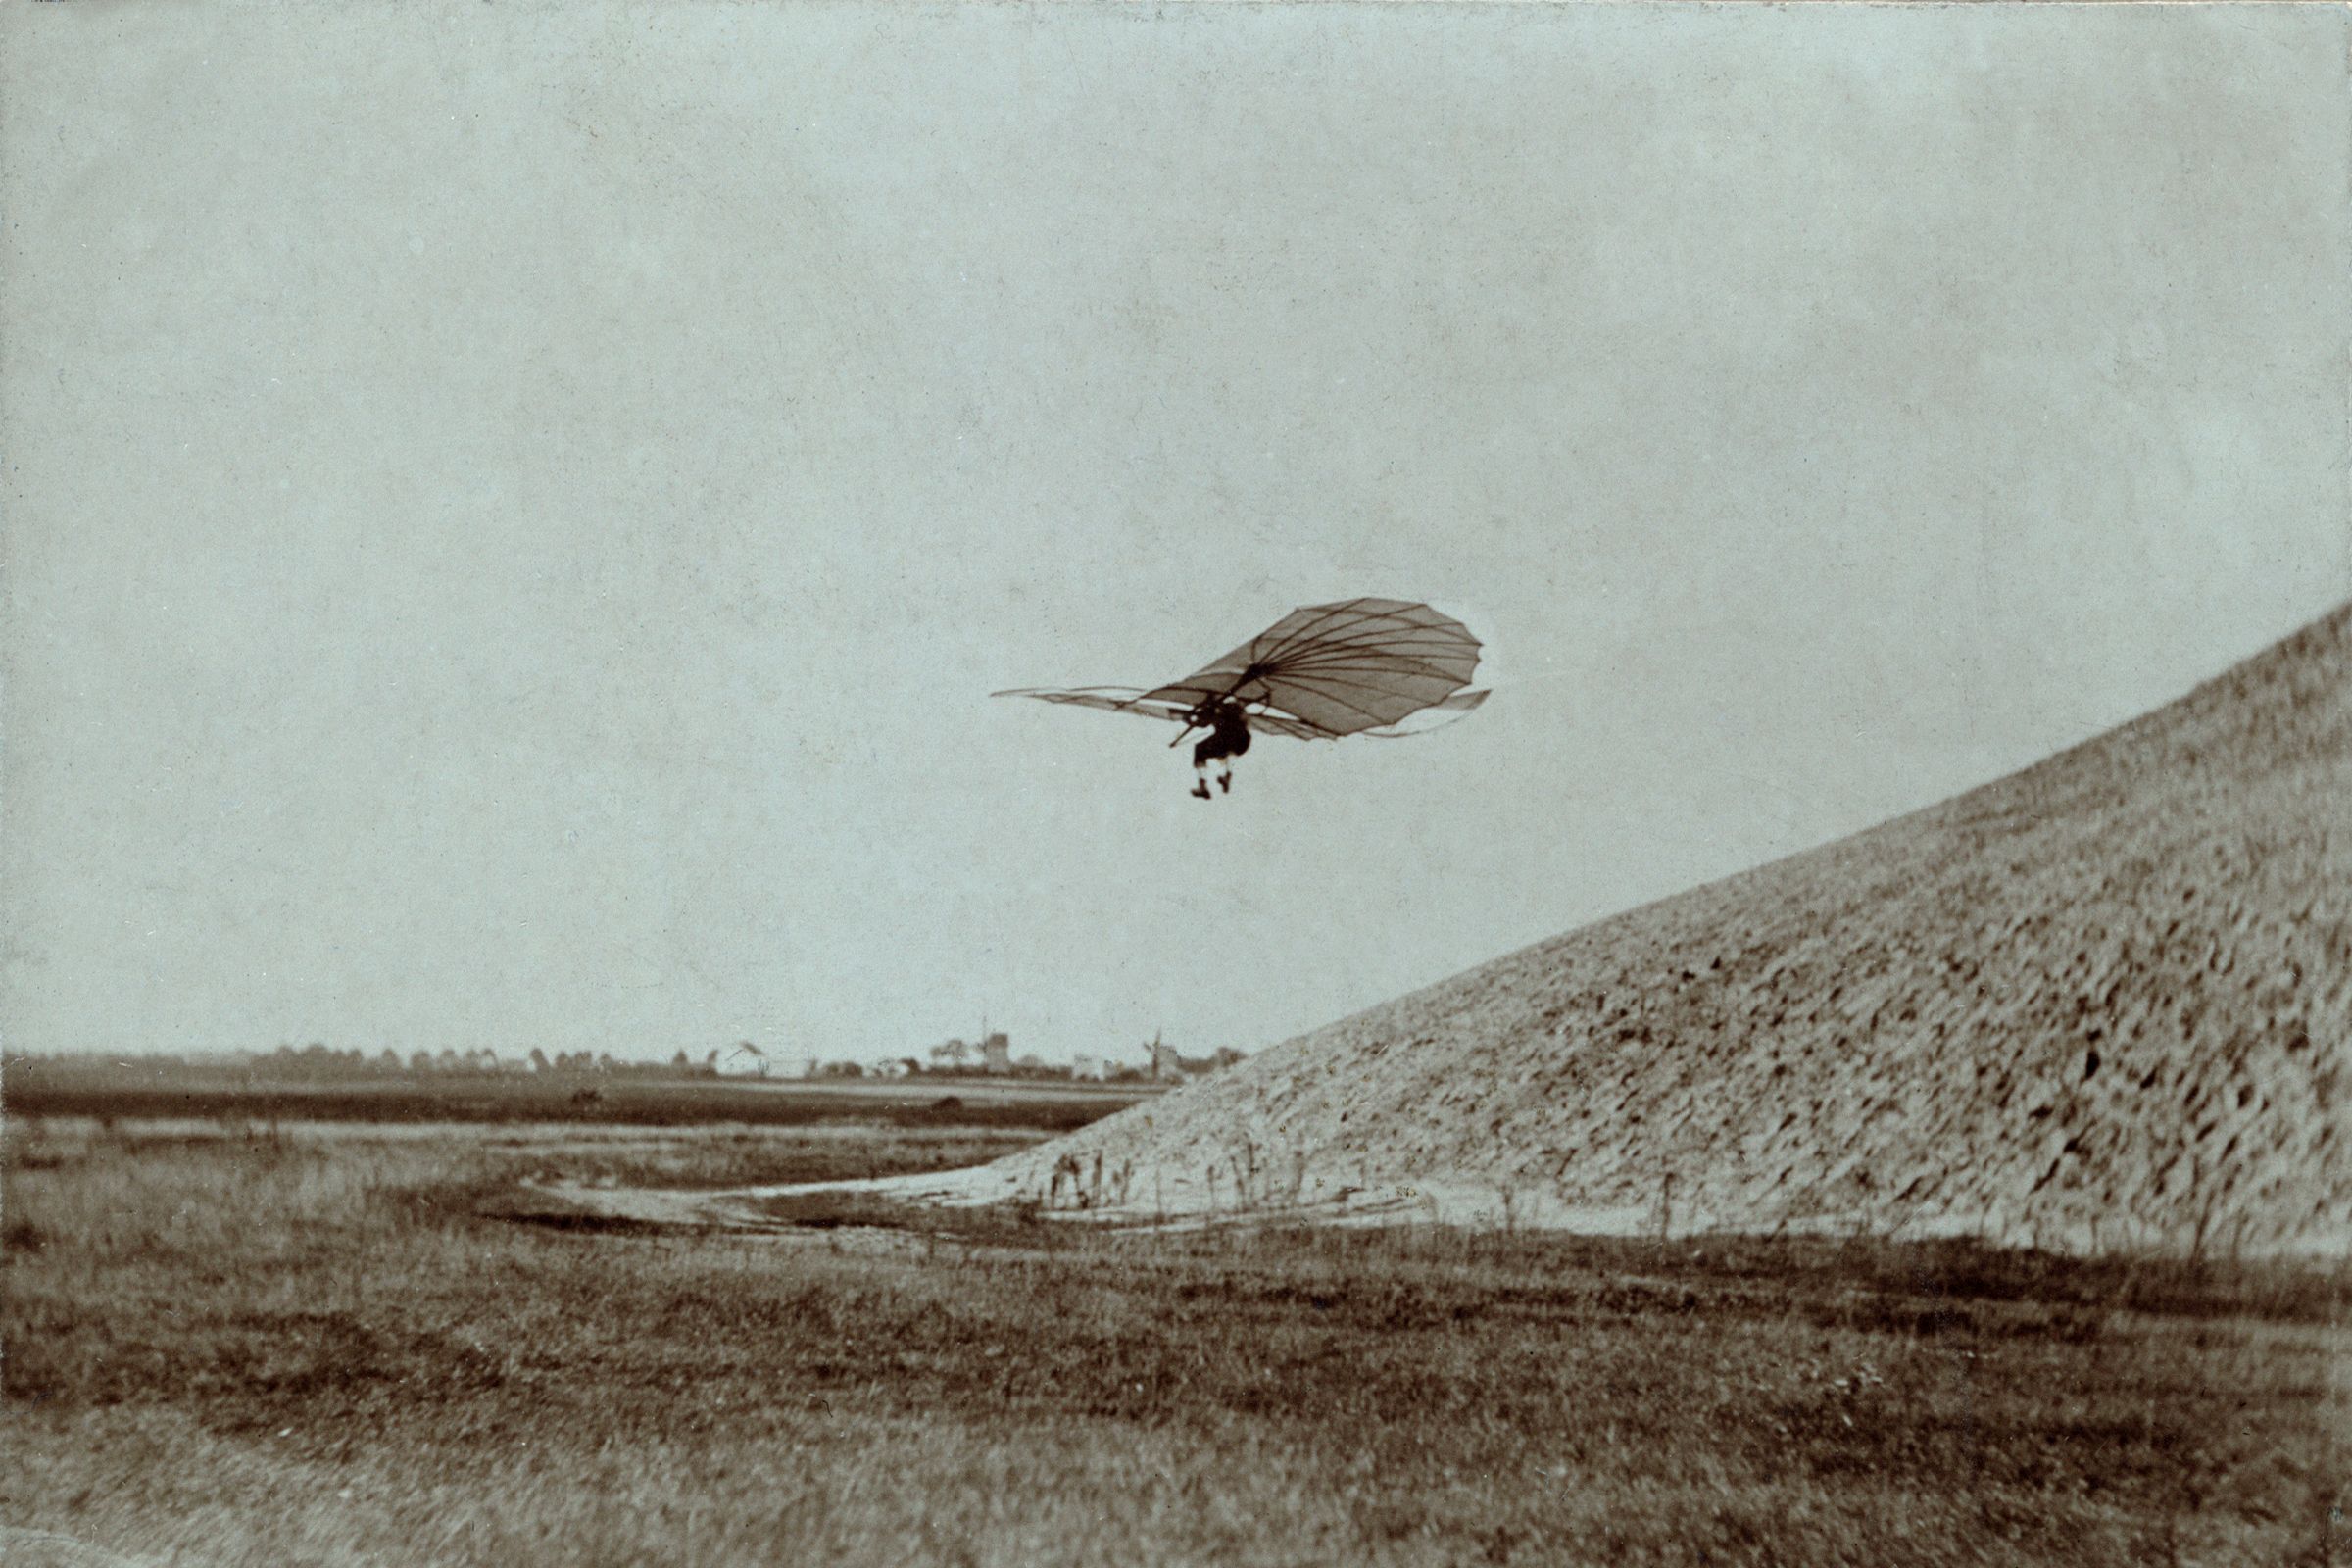 Lilienthal flying